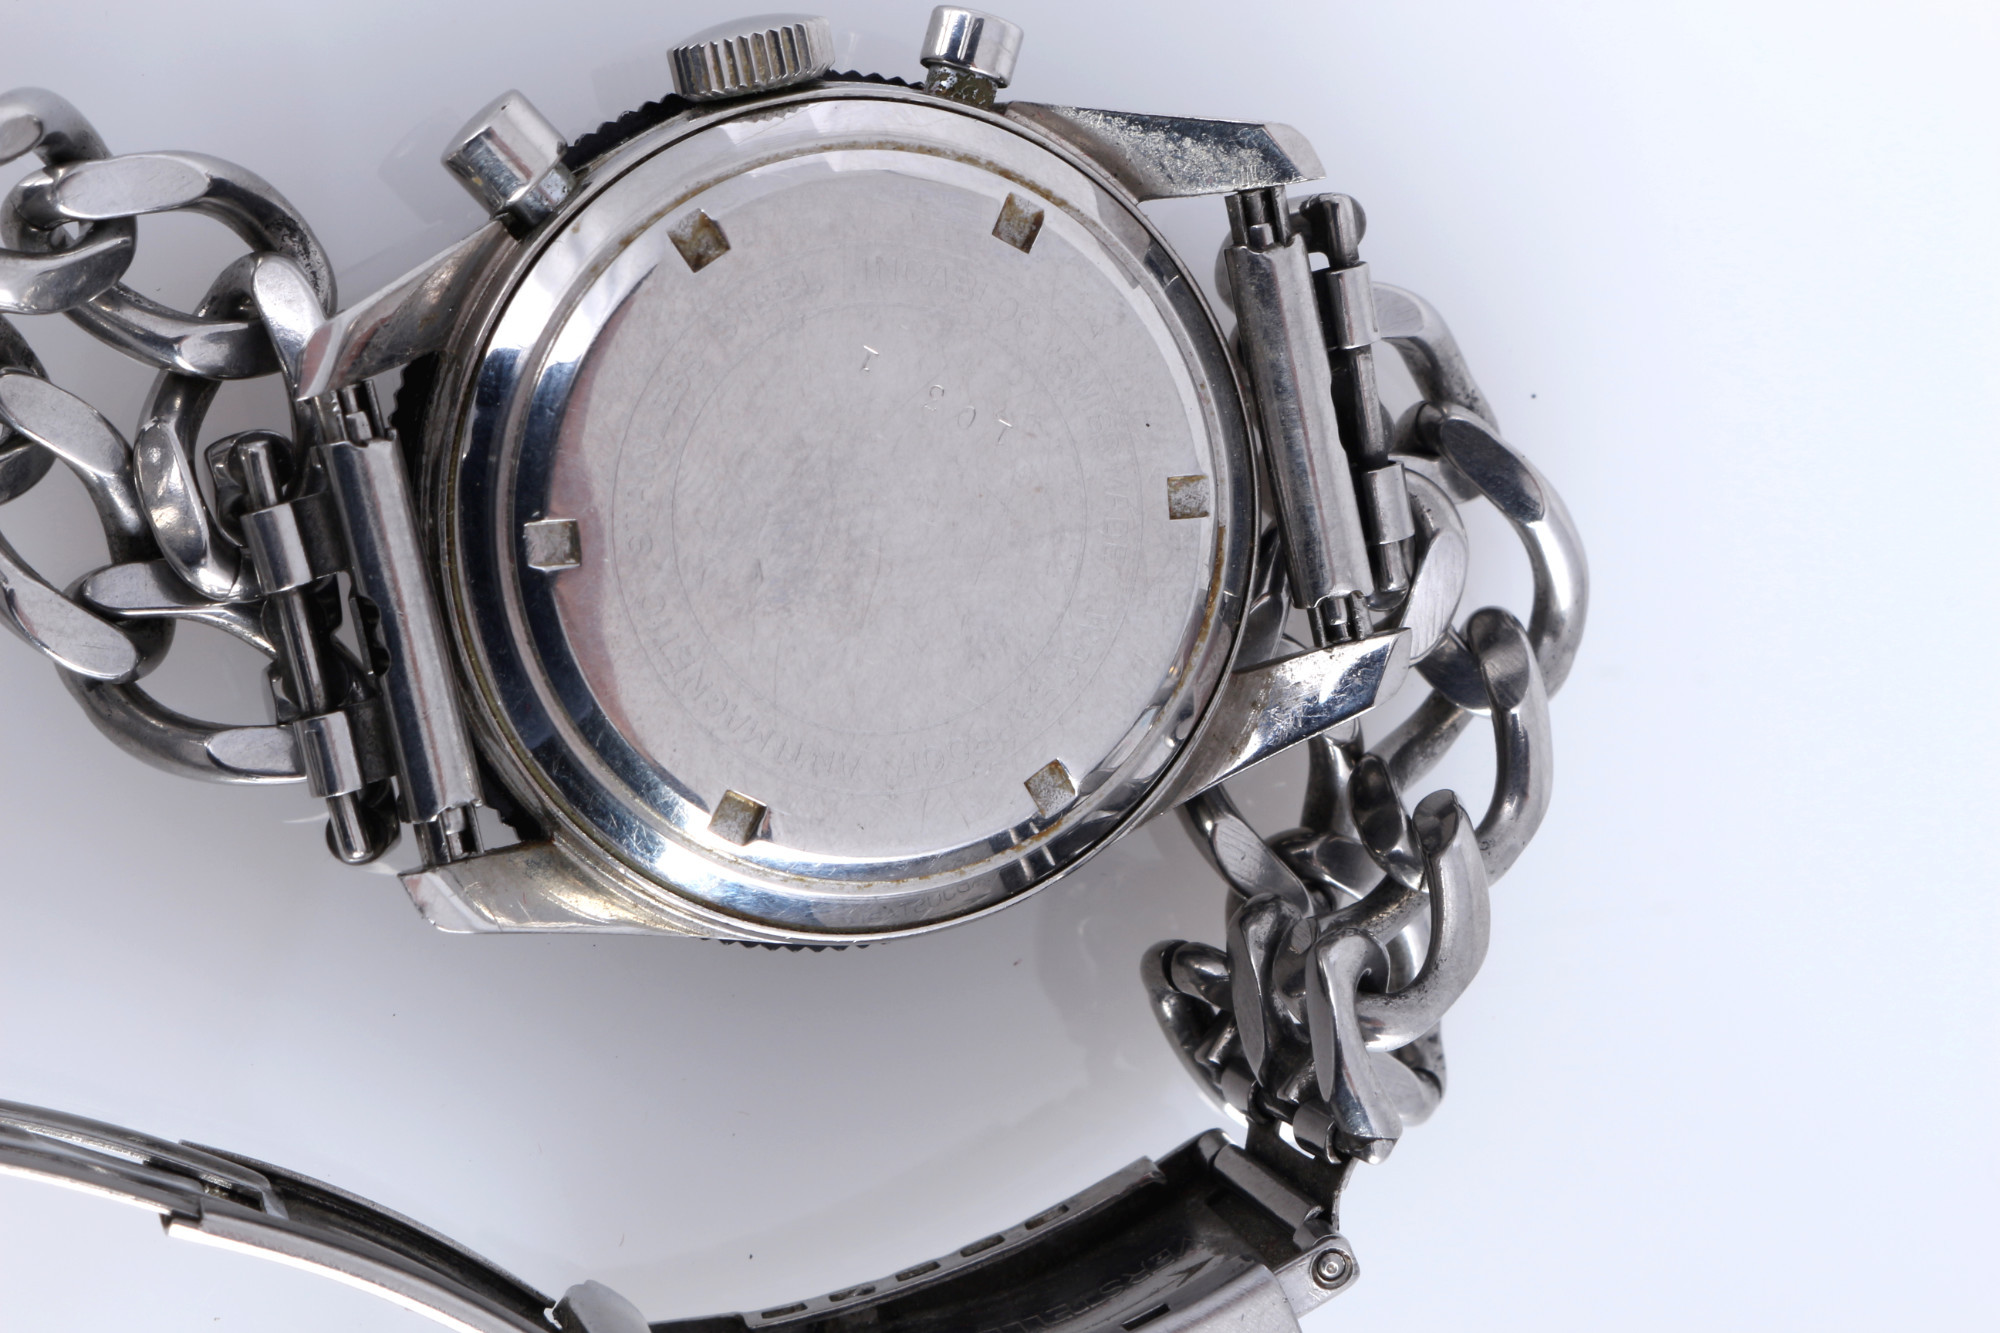 Hanhart Chronograph Pilot's Watch 415 ES with Lemania movement, - Image 5 of 7